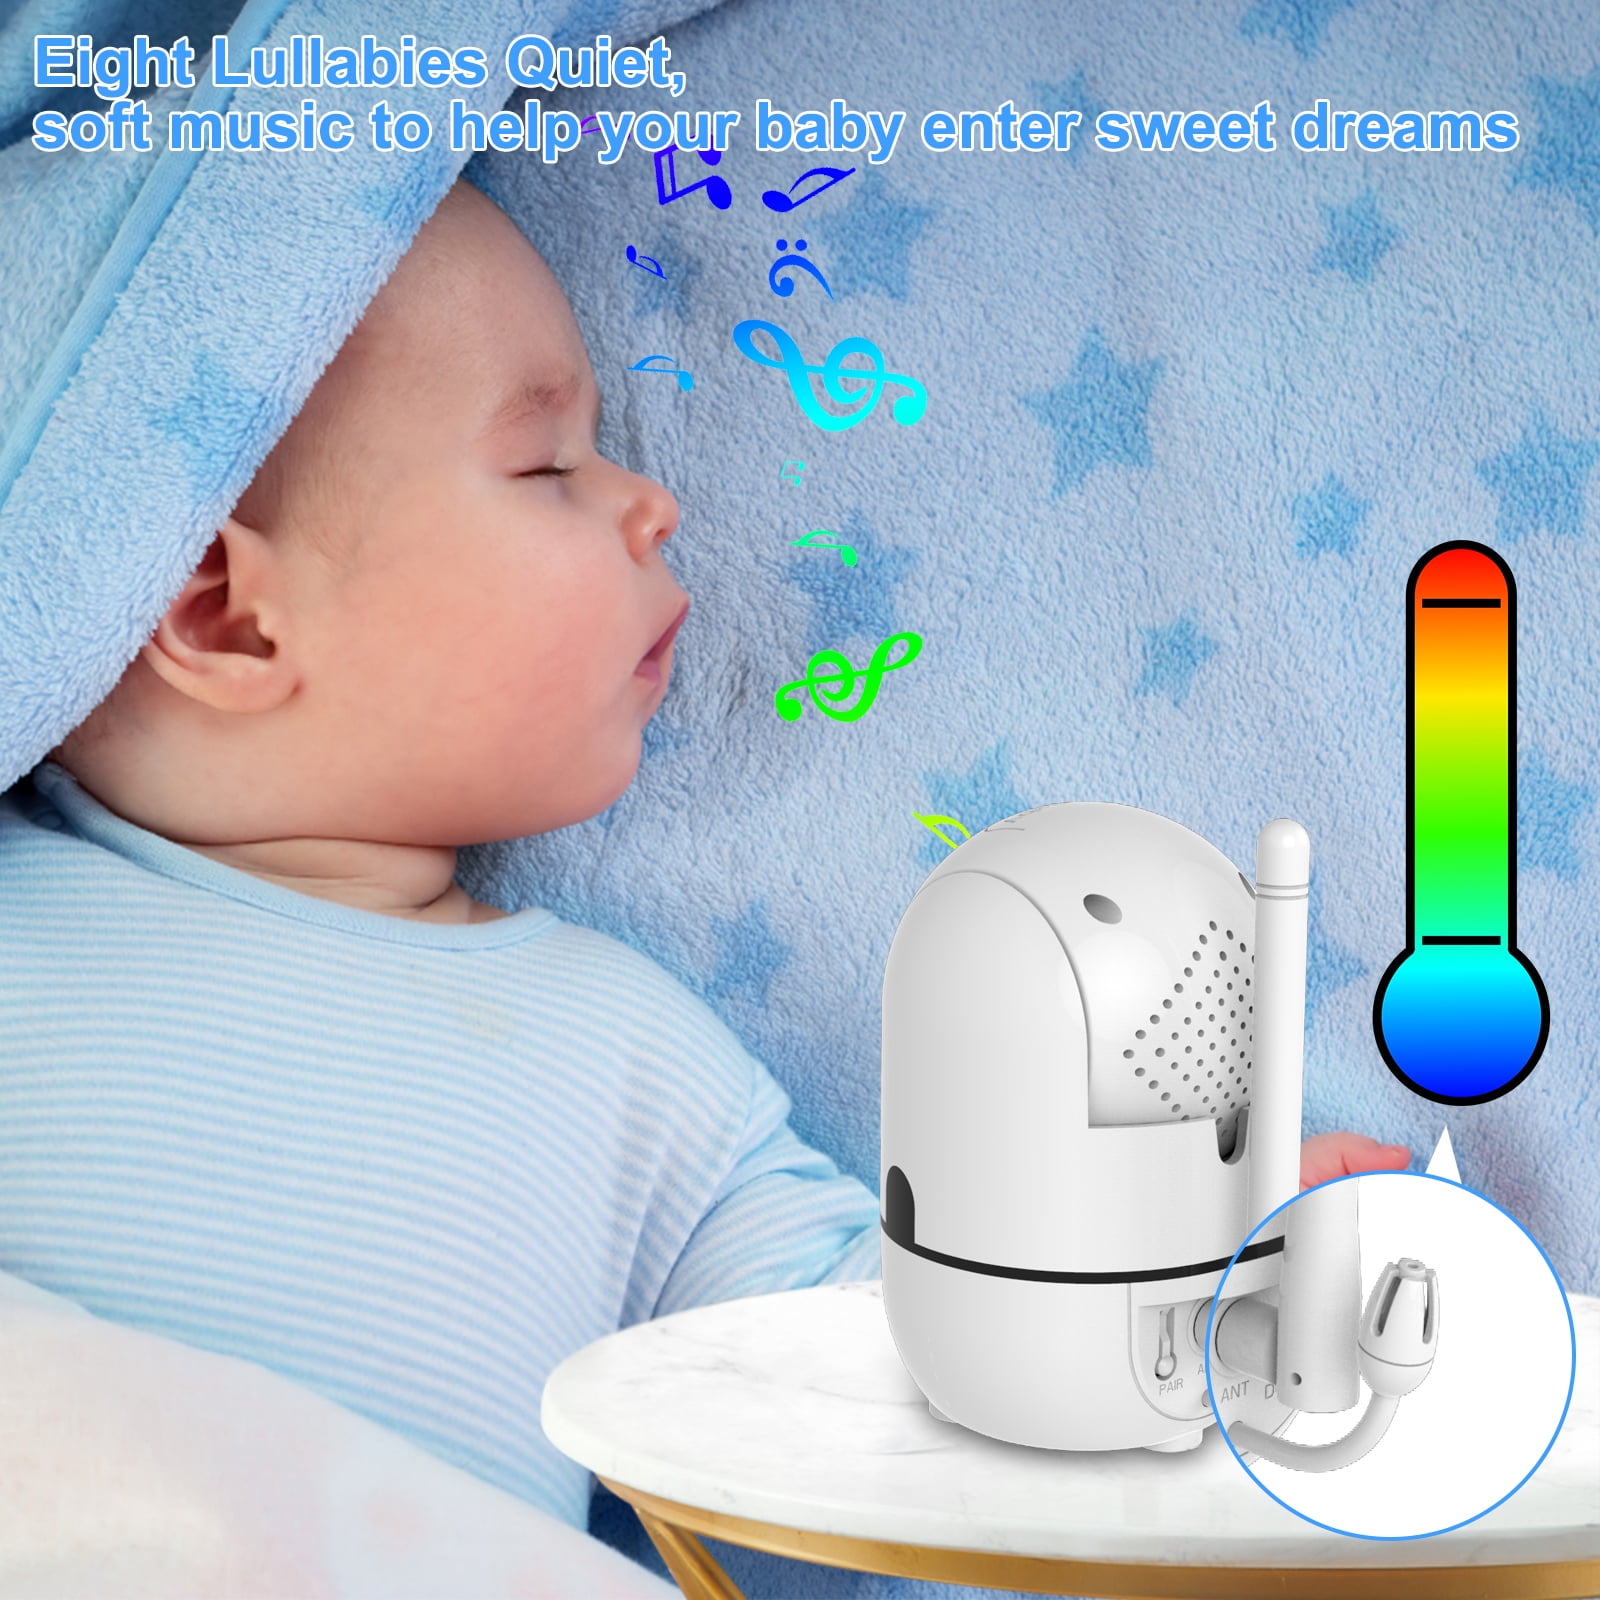 Unboxing Camera HelloBaby HB65 3.2 inch Baby Monitor with Remote Night  Vision. 